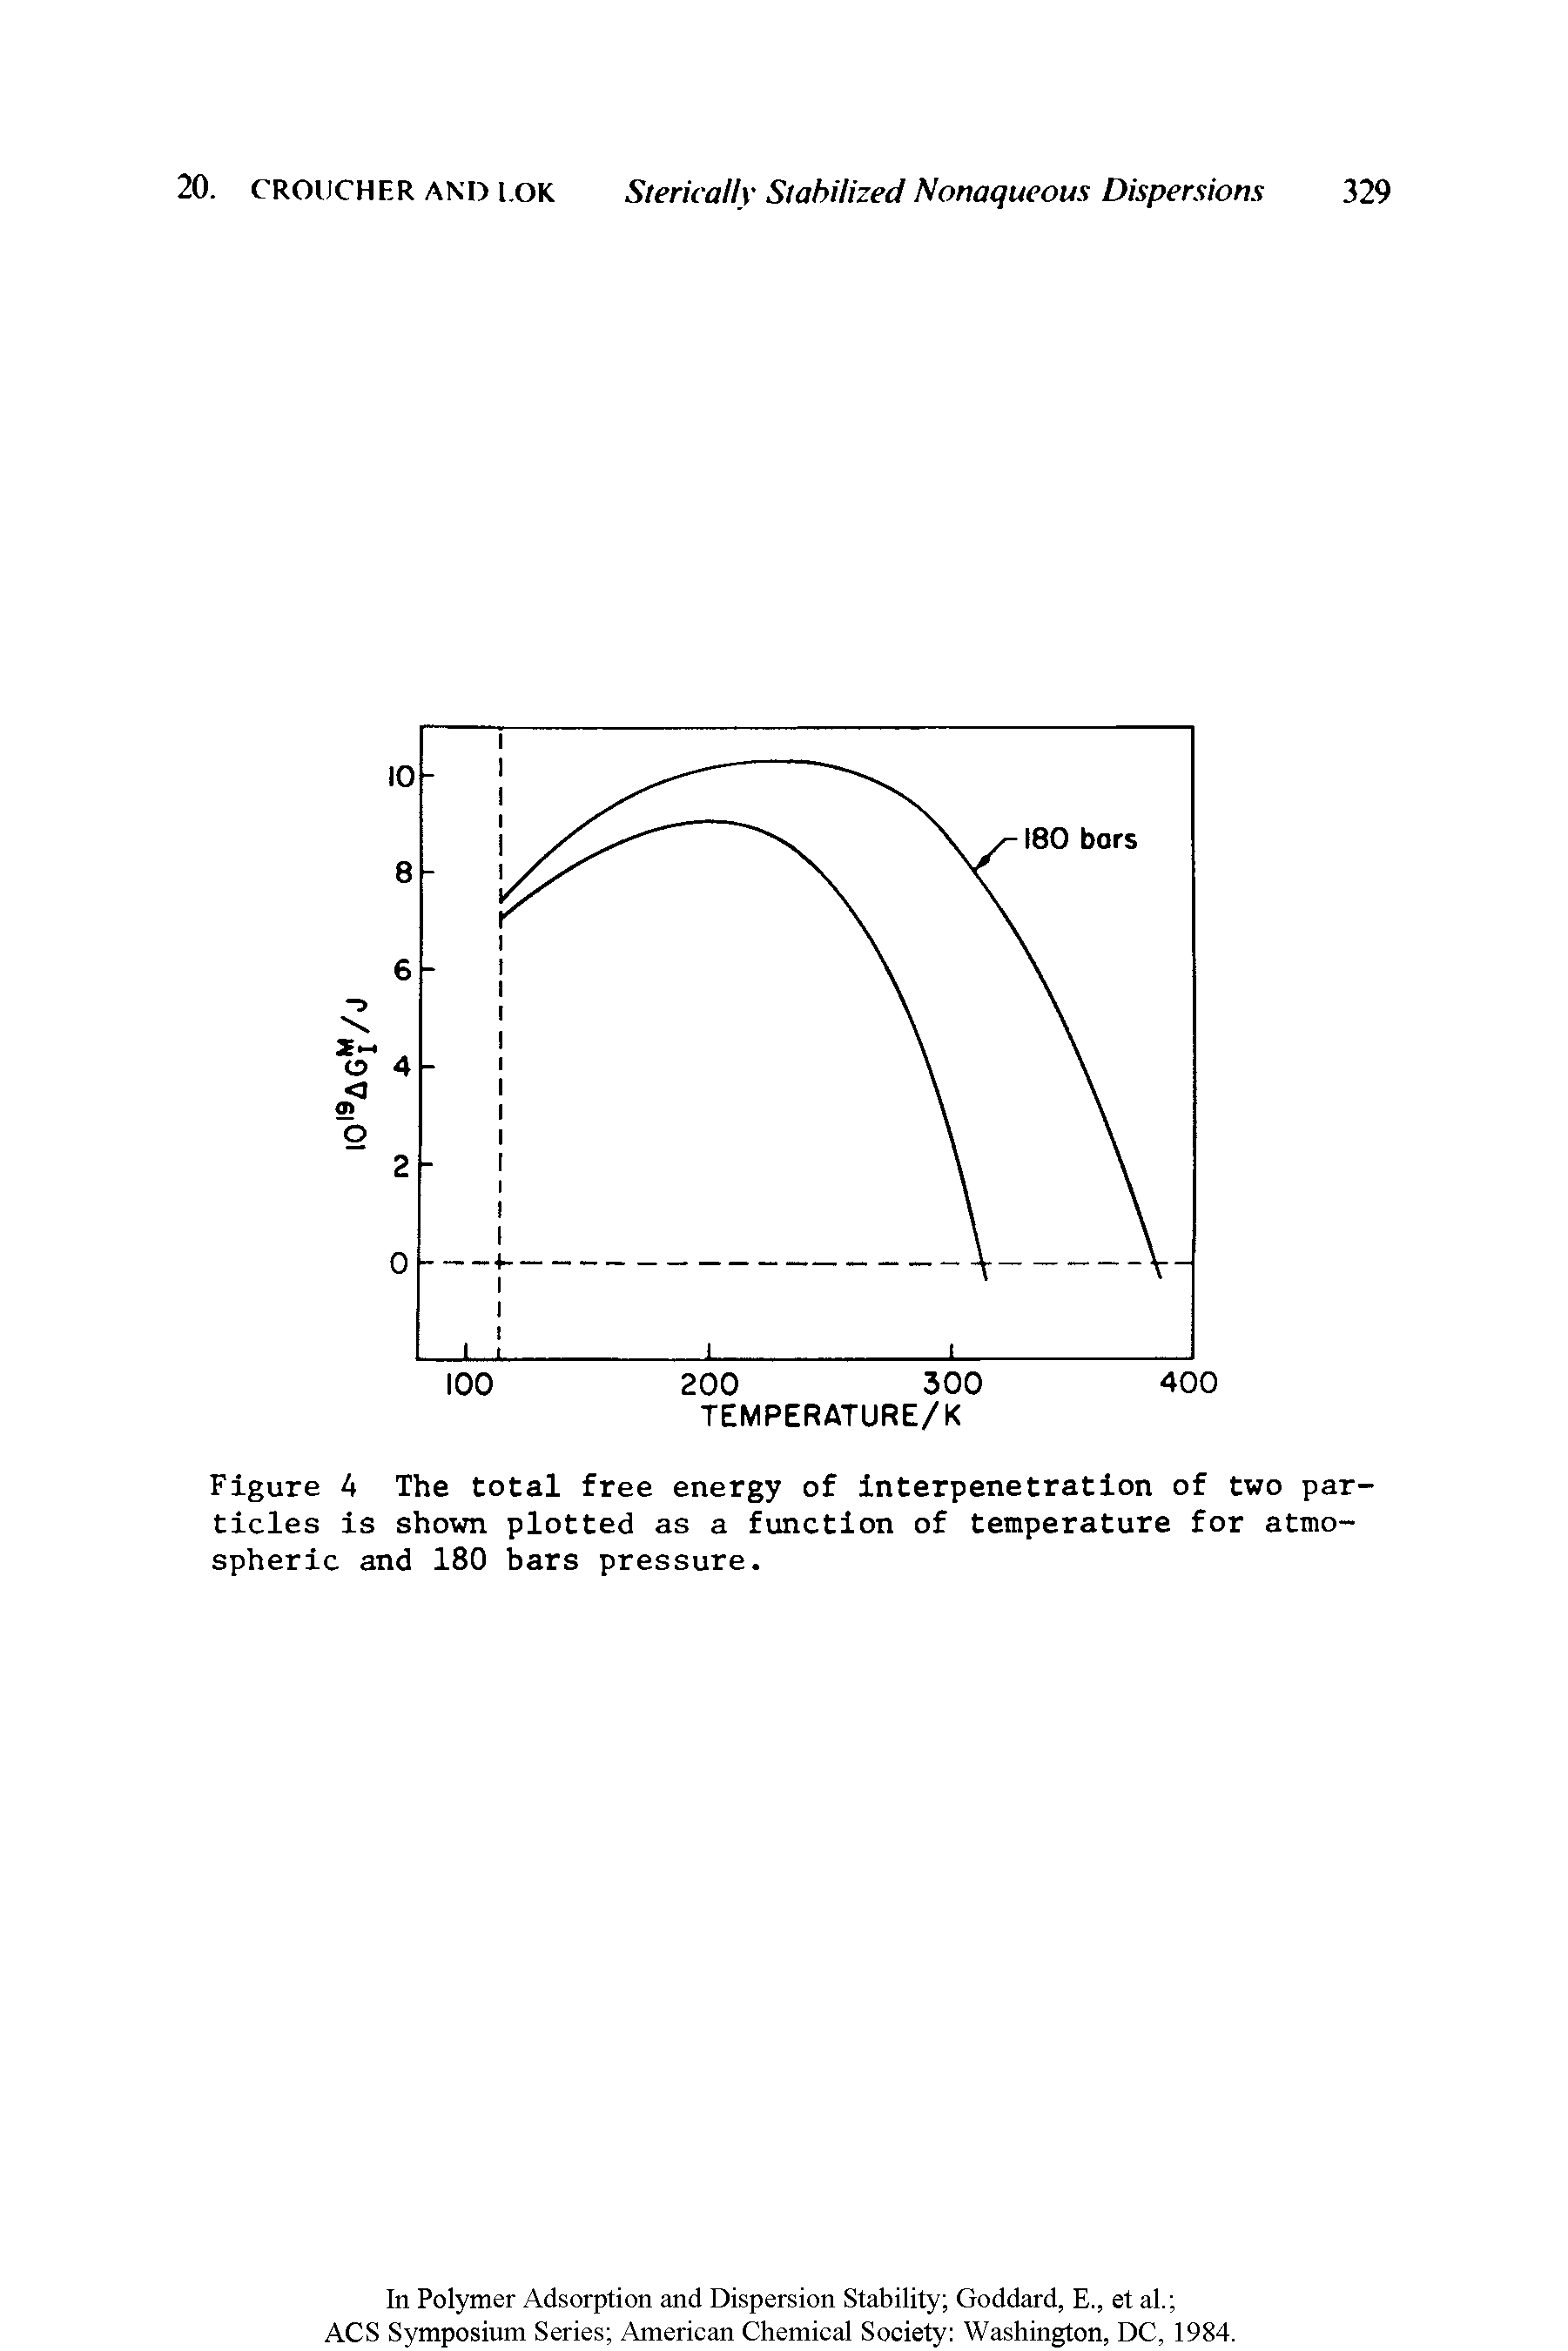 Figure A The total free energy of interpenetration of two particles is shown plotted as a function of temperature for atmospheric and 180 bars pressure.